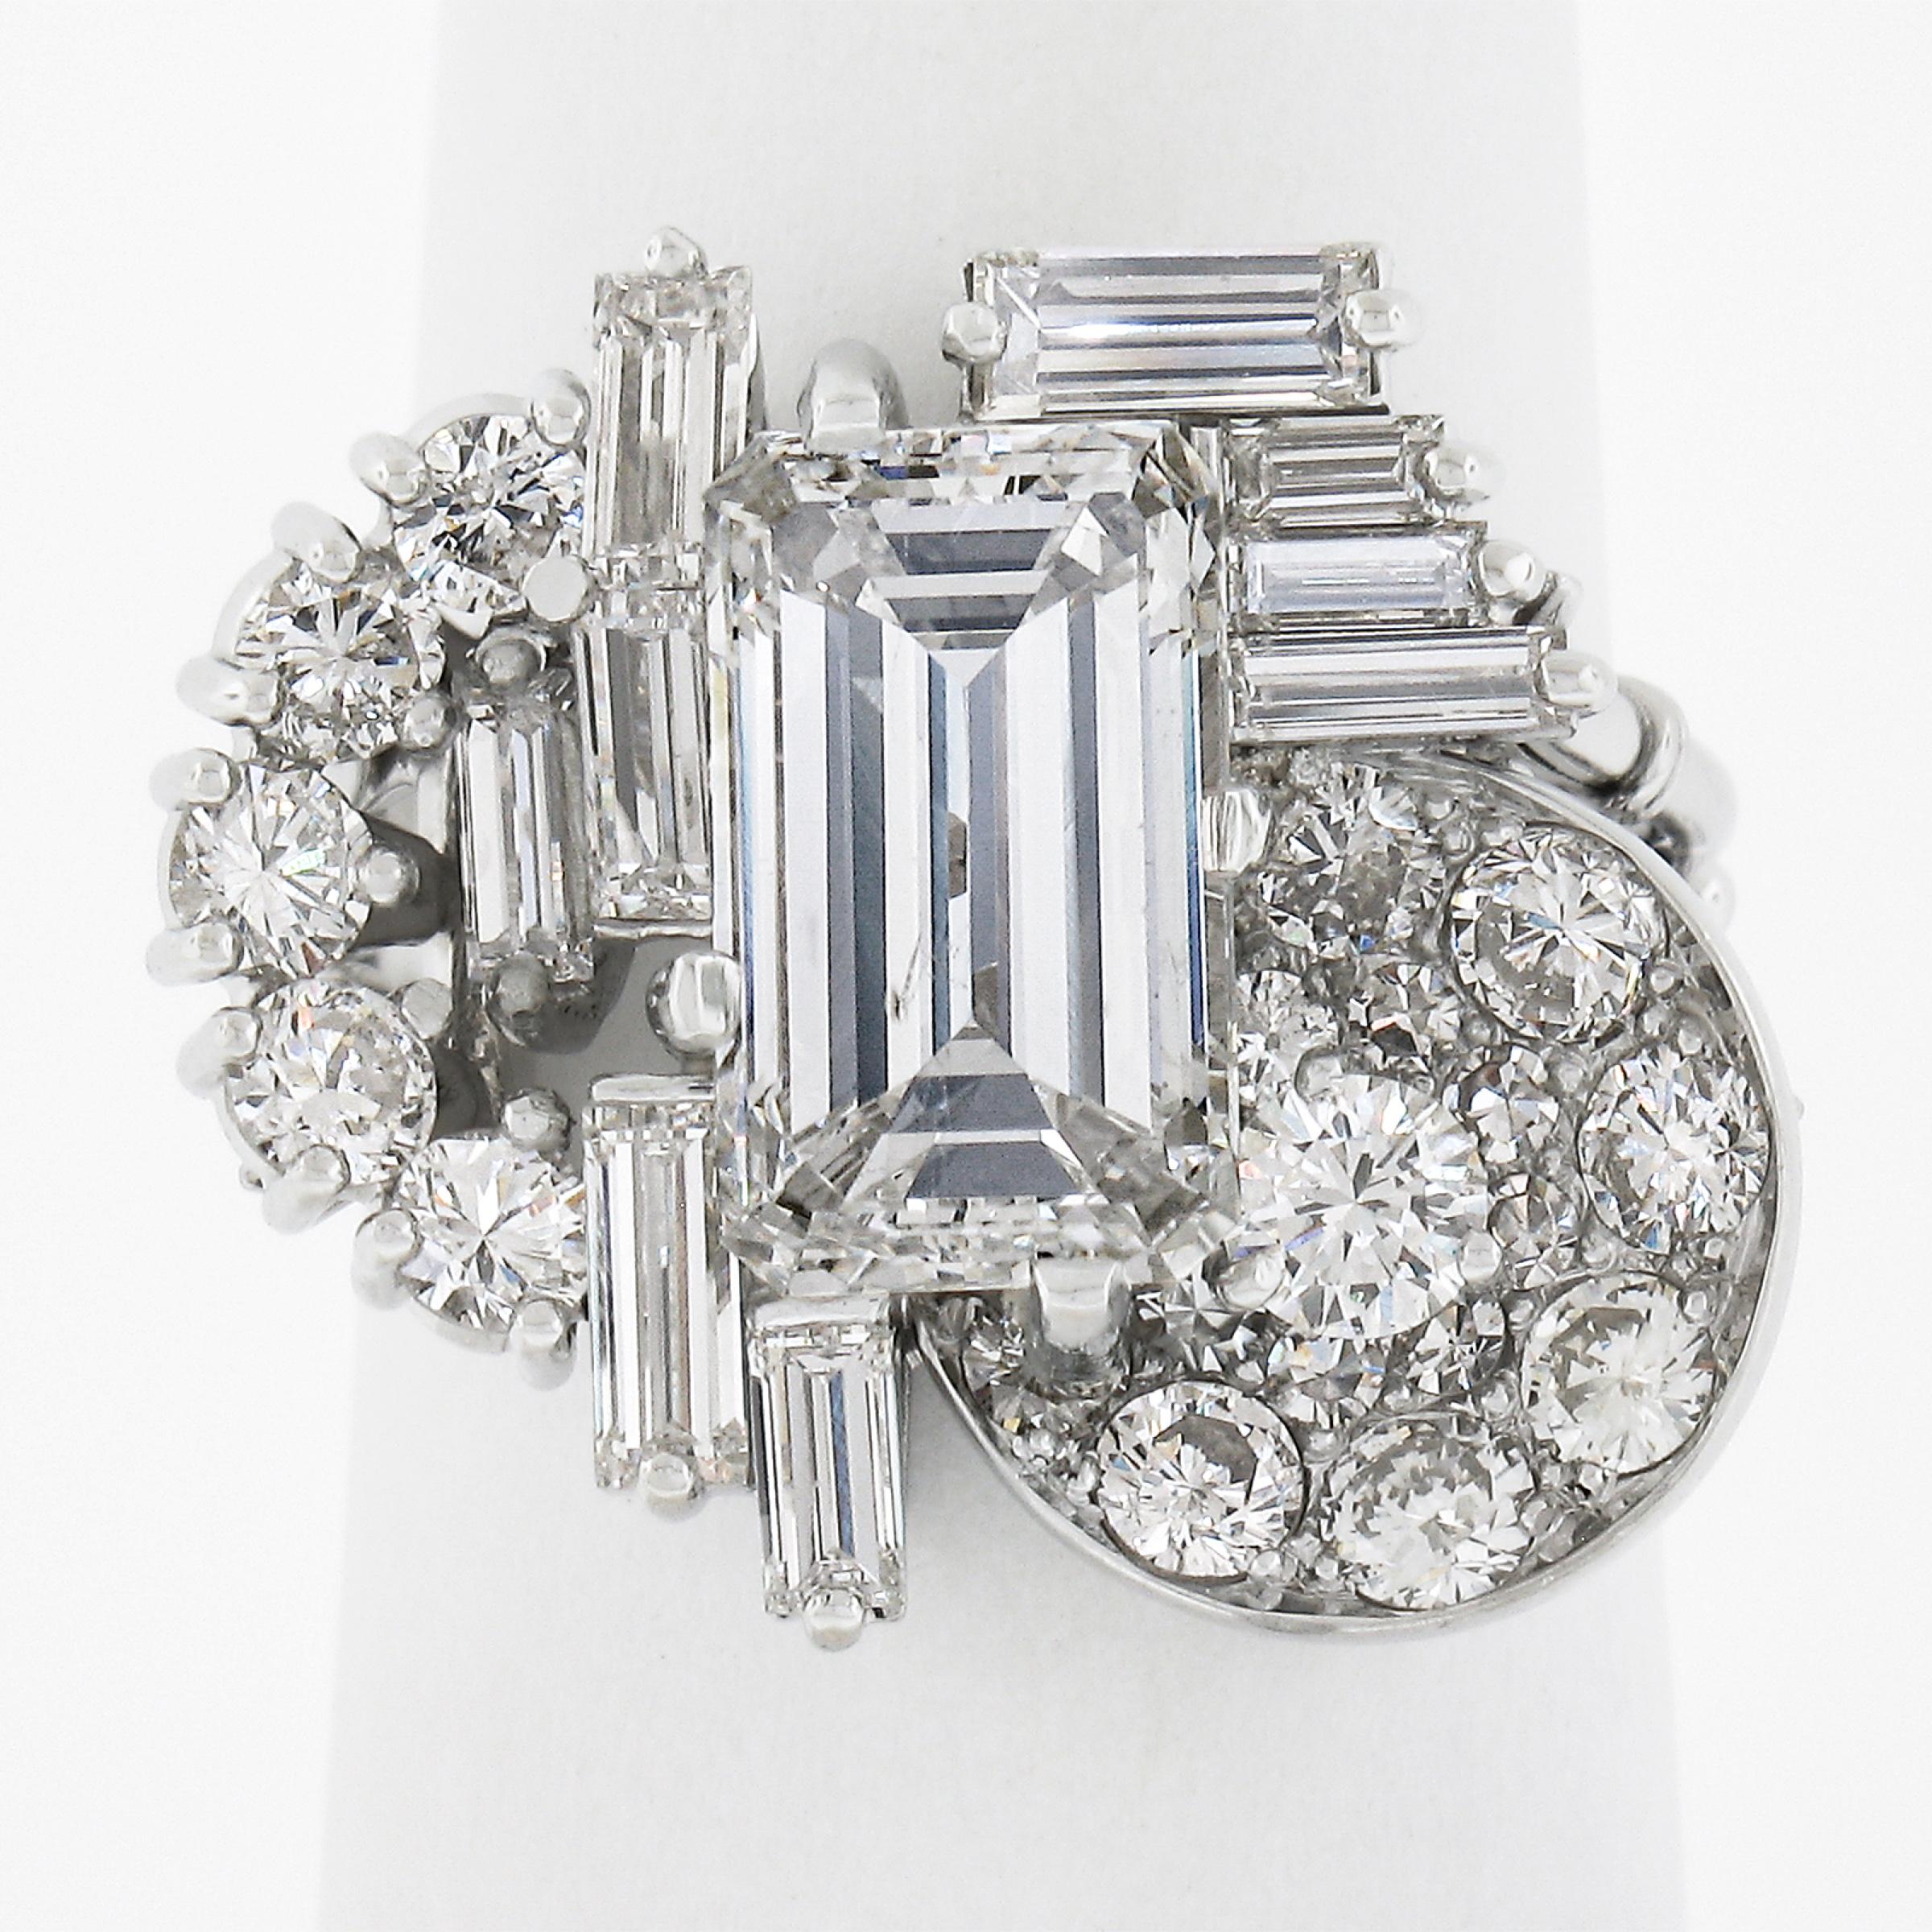 This super glamourous and fancy diamond statement ring is crafted in solid platinum and features a large, 3.0 carat emerald cut diamond at the center of the design. It is uniquely surrounded by baguette and round cut diamonds that total